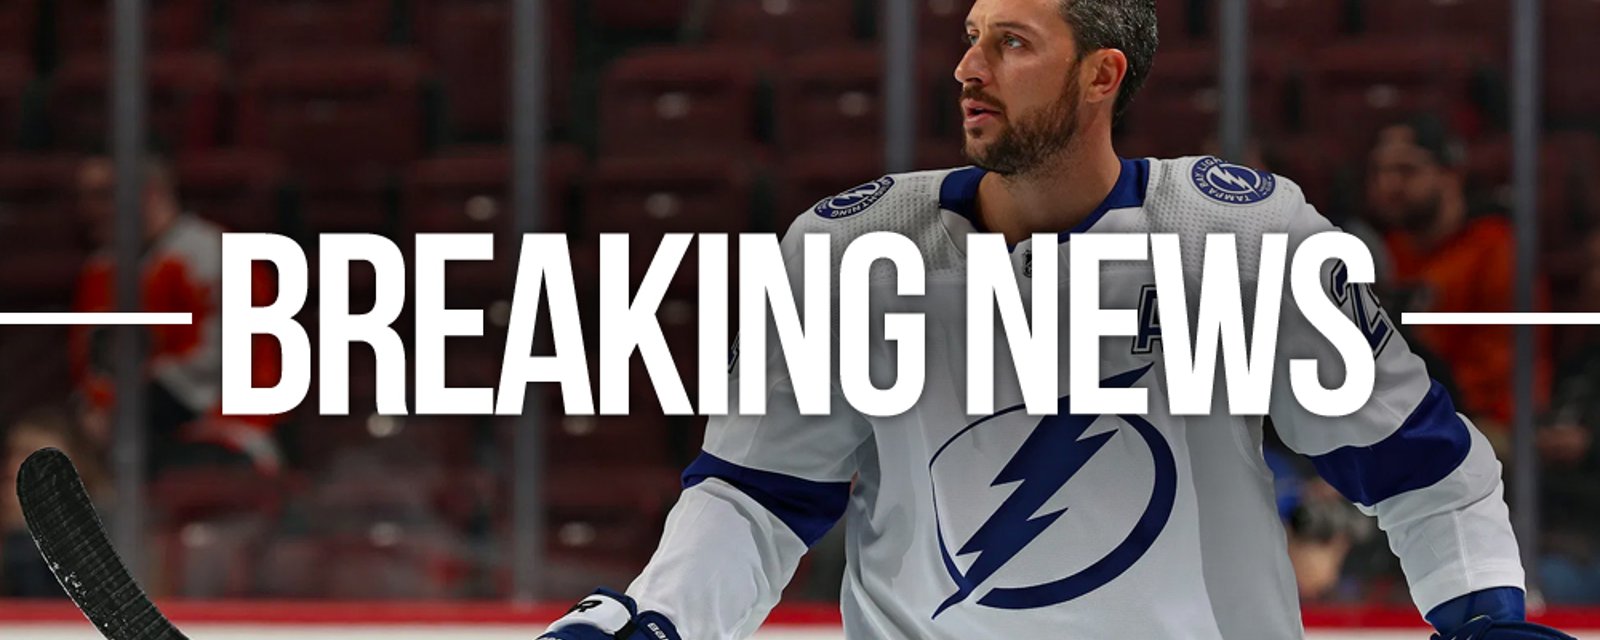 Ryan Callahan is forced to retire after sustaining too many injuries and surgeries